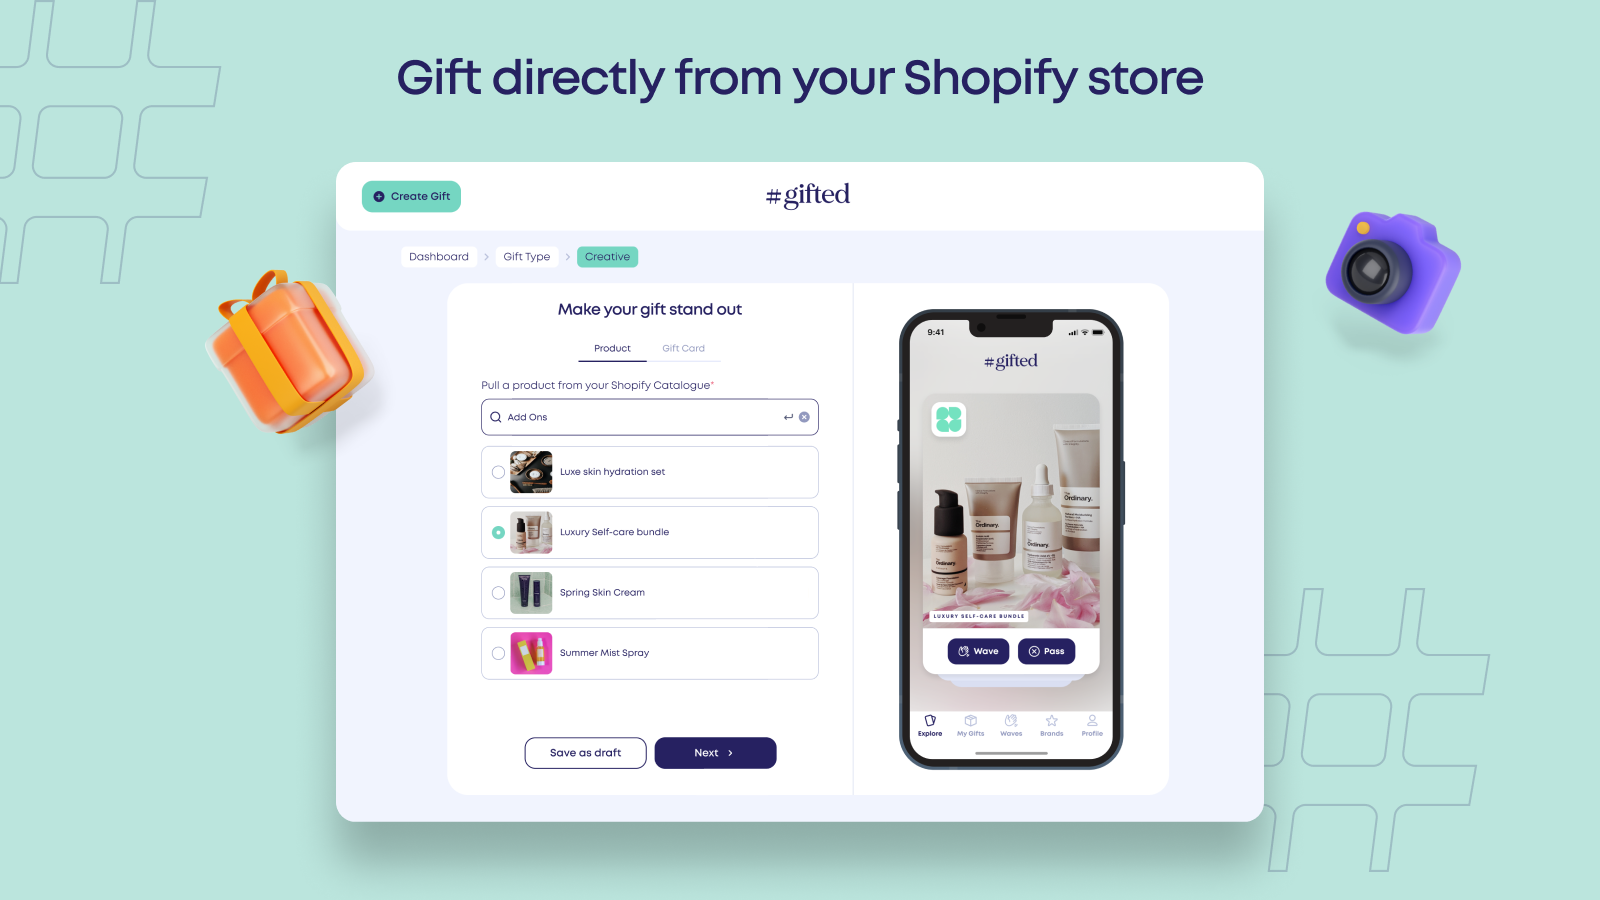 Gift directly from your Shopify store